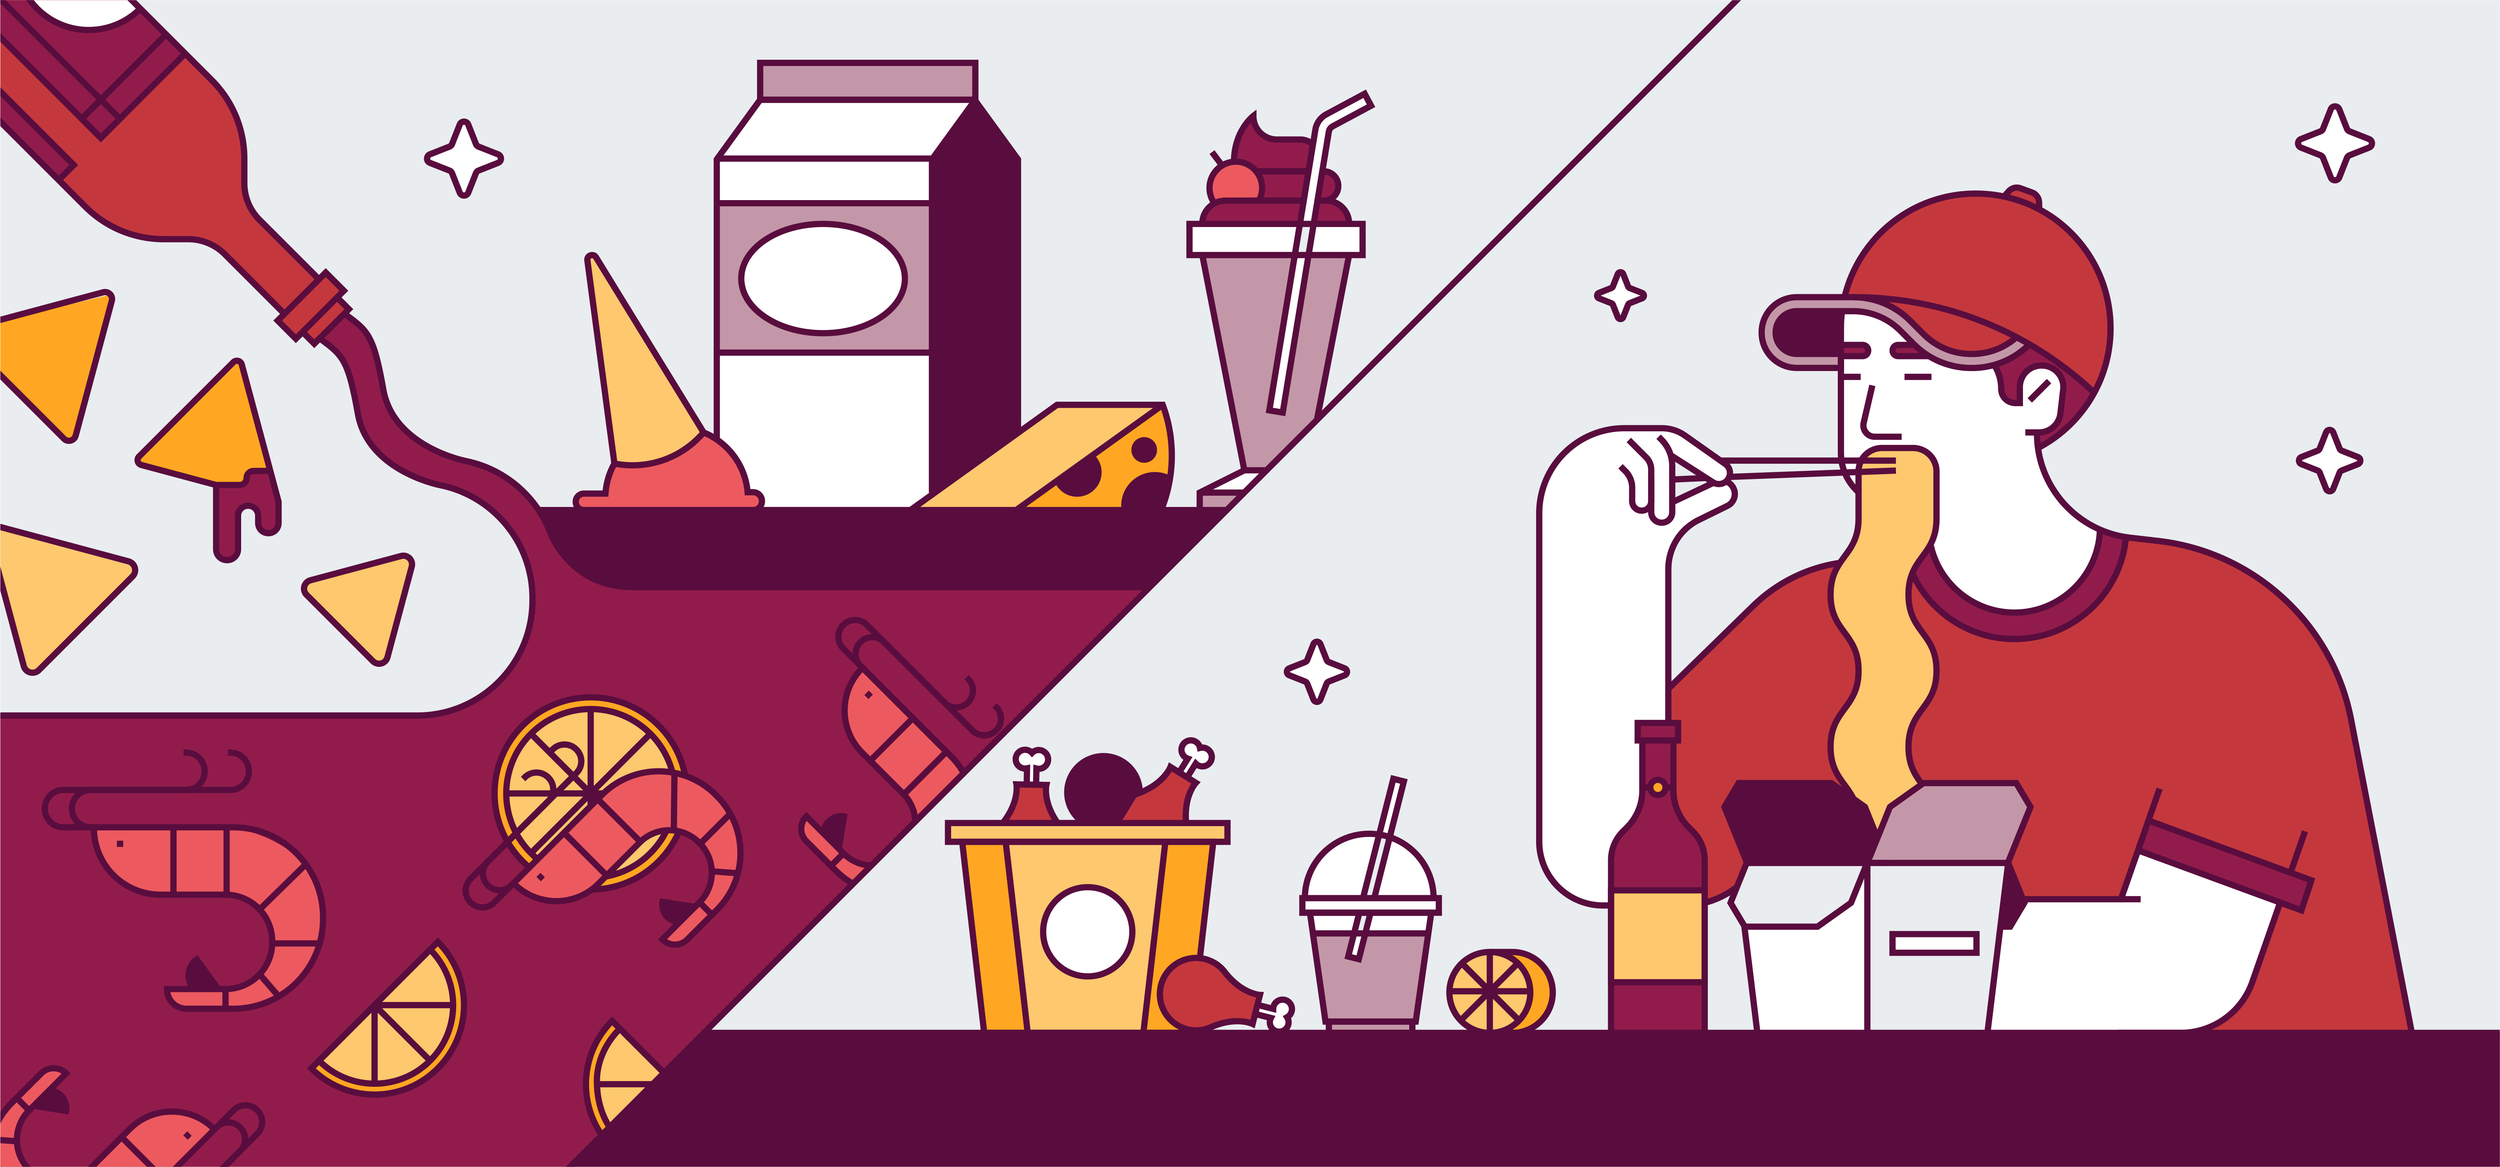 Colourful line illustration of various food items which reads 20 FOODIES, CHEFS, & FOOD BLOGGERS WE’RE DIGGING.